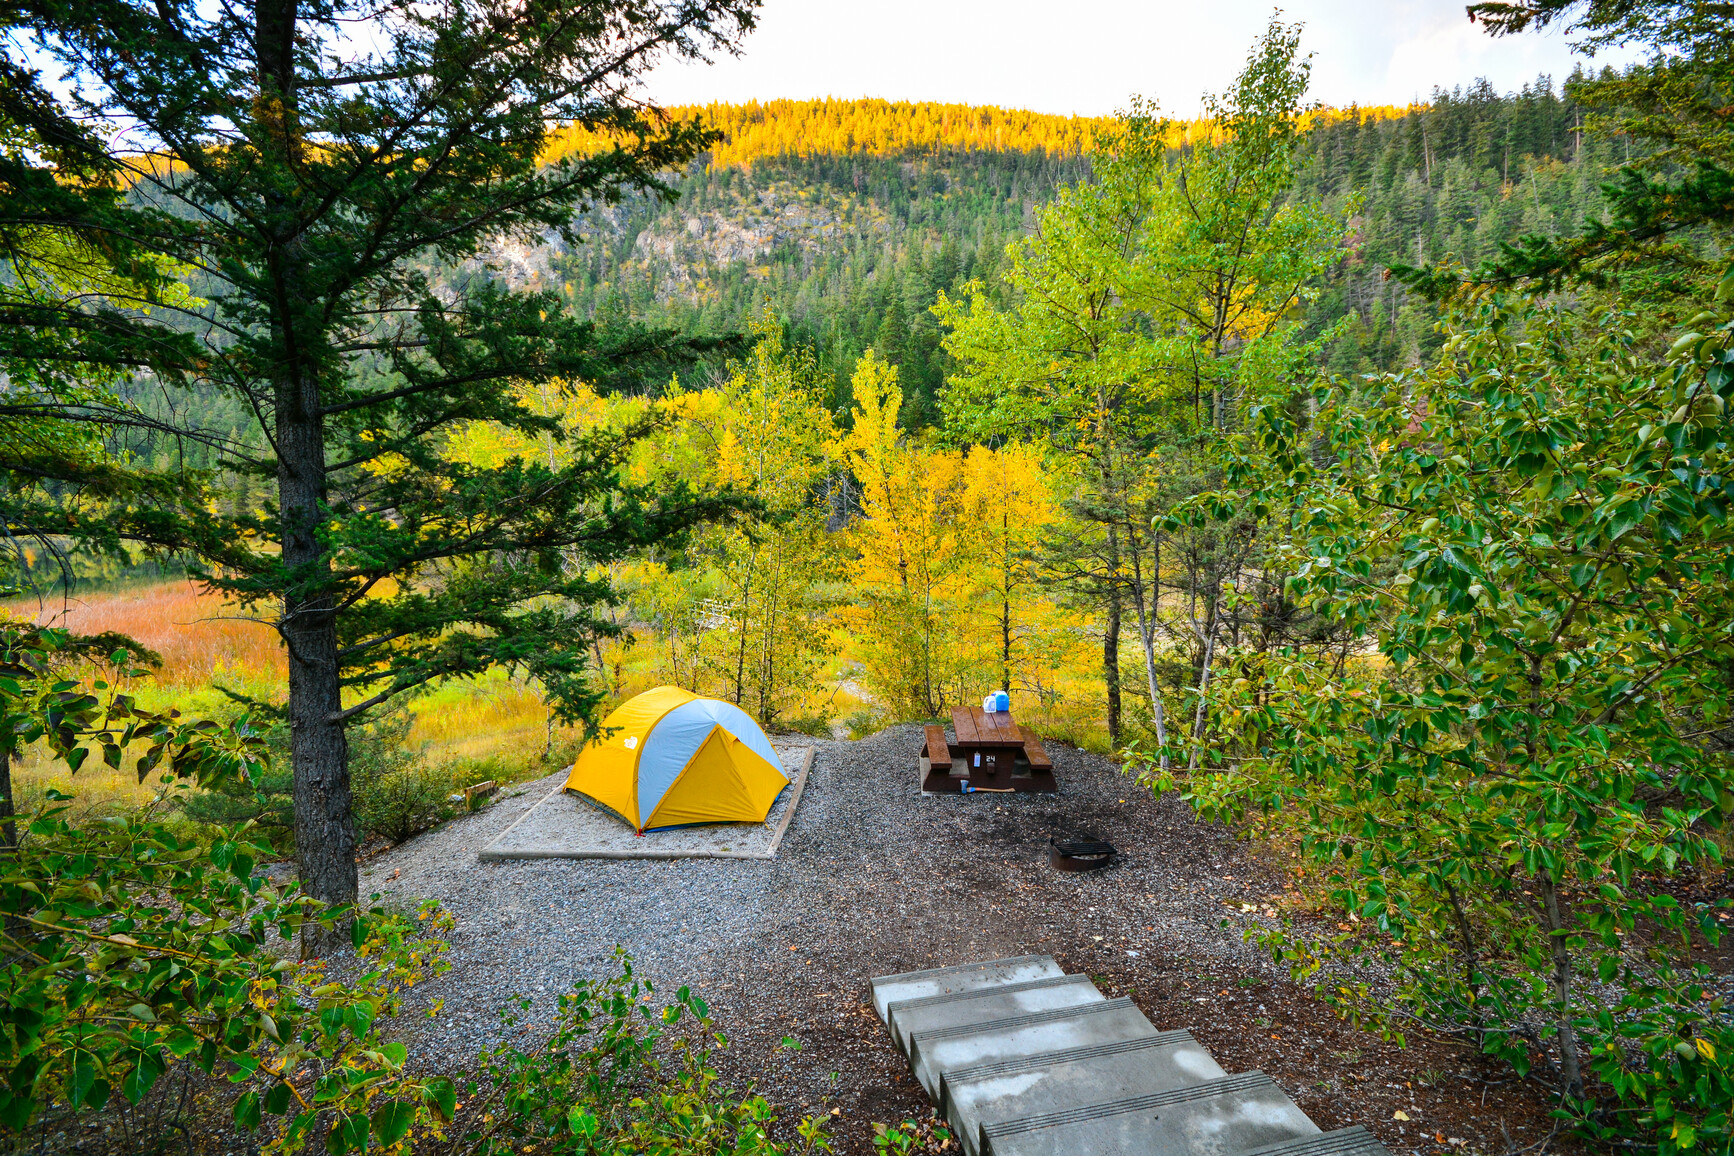 A forested campsite with stairs leading down to it, a tent on a tent pad, a picnic table, a fire ring. In the background are forest covered mountains.